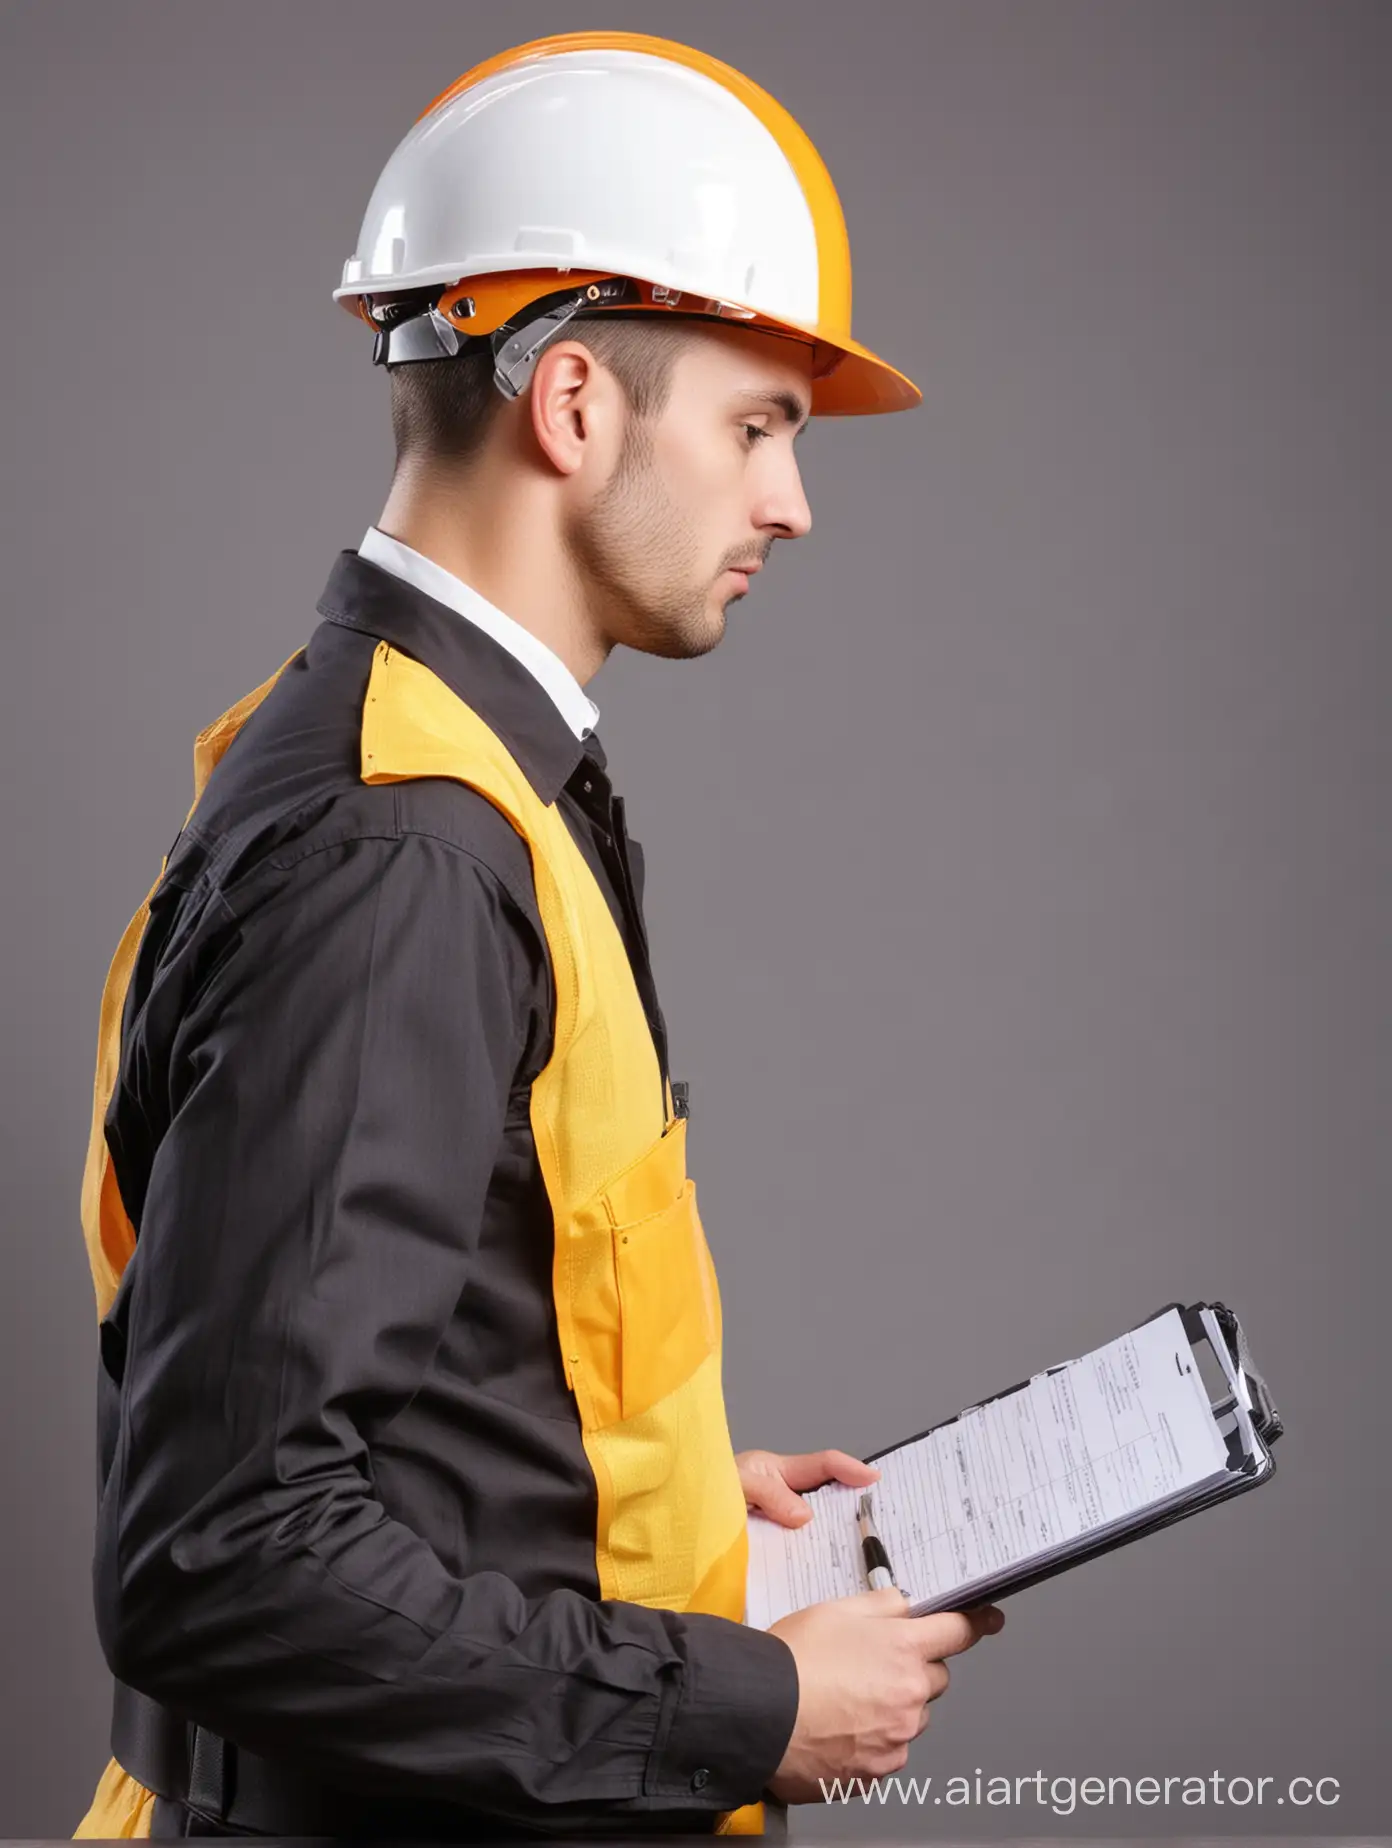 Profile-Portrait-of-Worker-with-Safety-Helmet-Folder-and-Pen